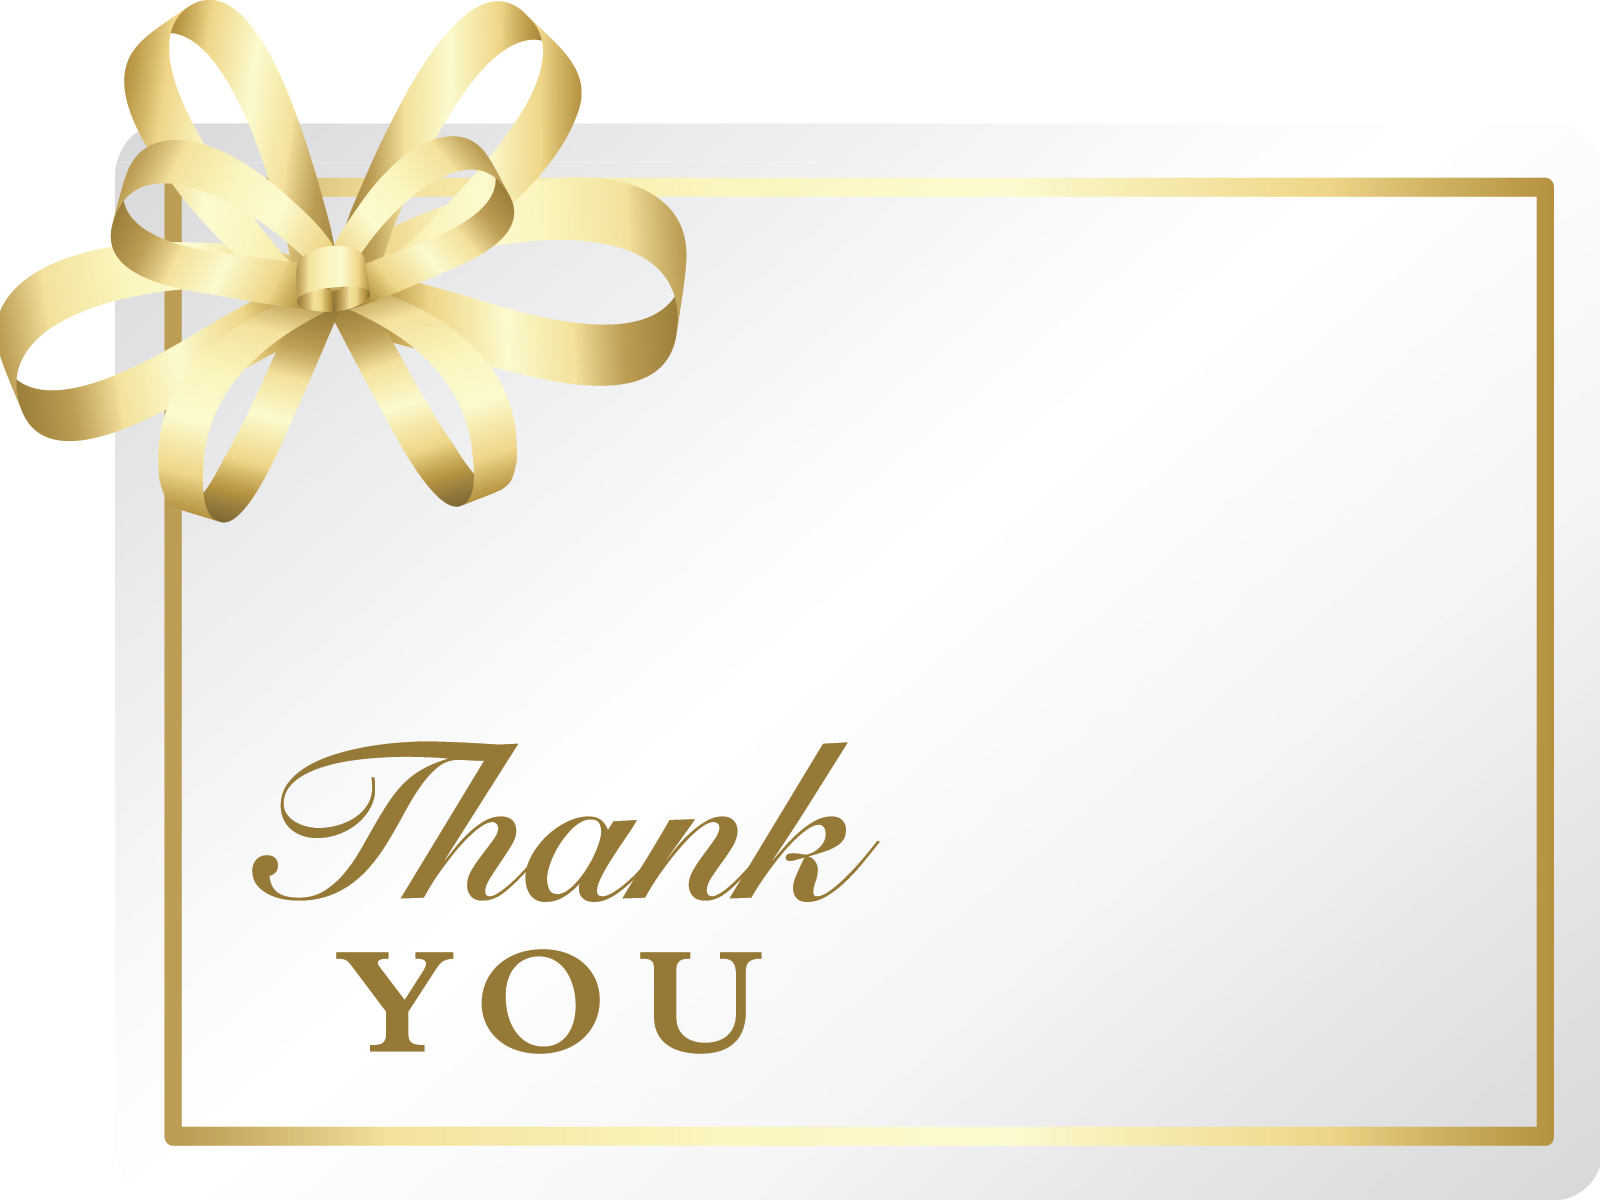 Thank you Template Free PPT Backgrounds and Templates